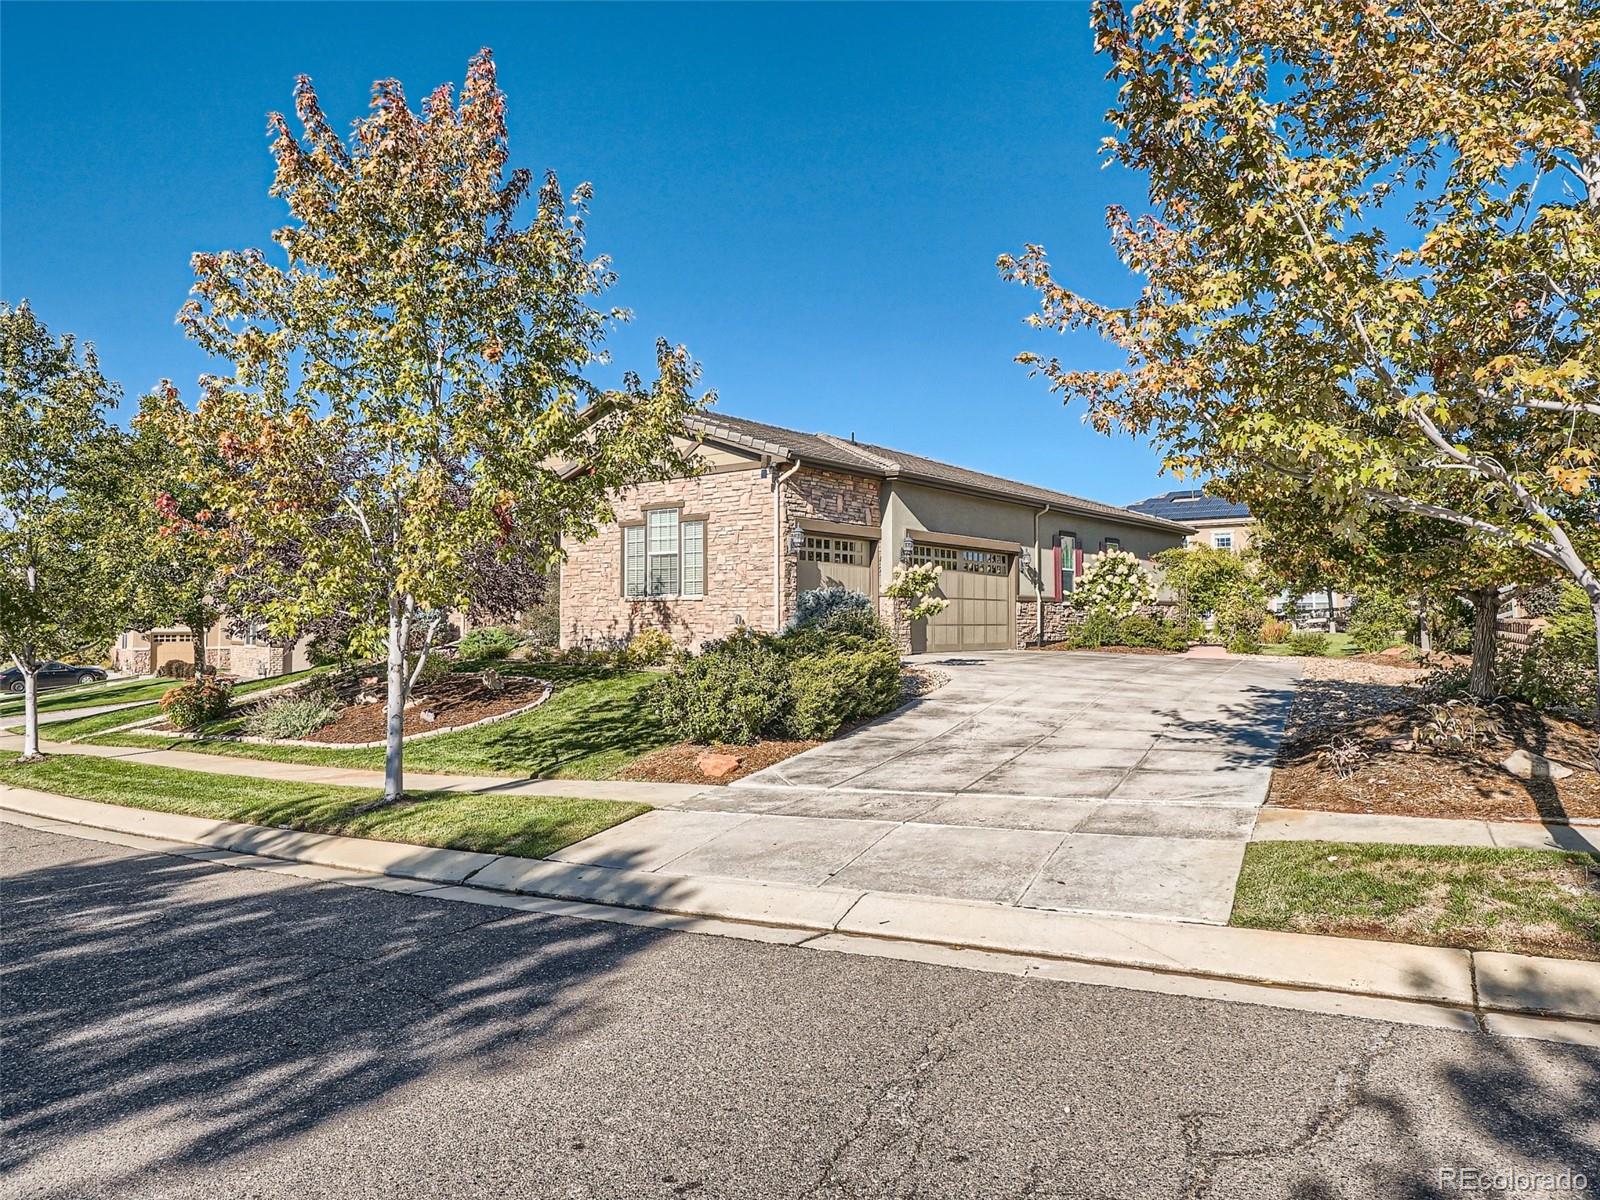 3120  traver drive, Broomfield sold home. Closed on 2024-05-15 for $960,000.